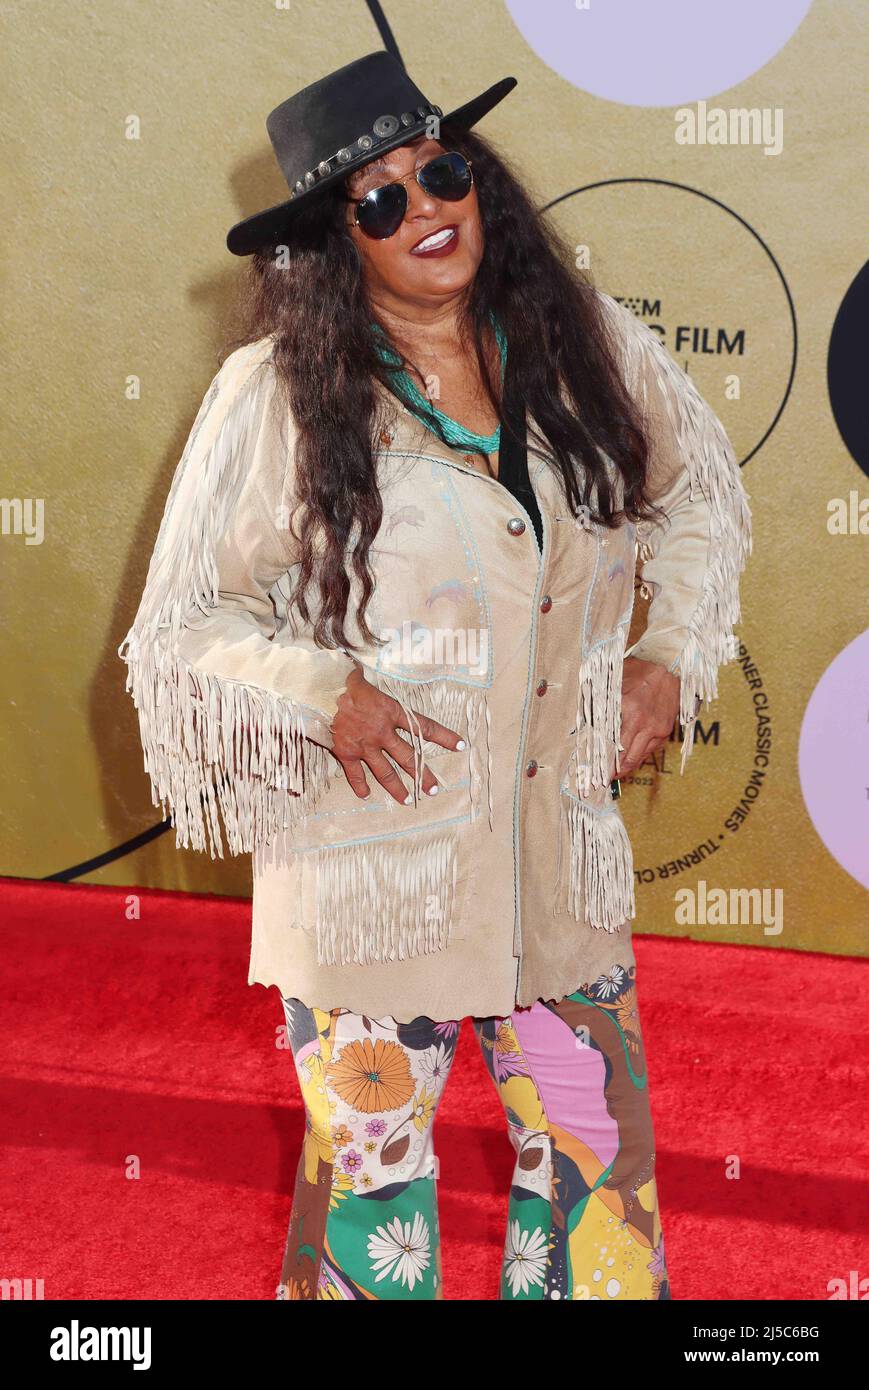 Los Angeles, USA. 21st Apr, 2022. Pam Grier 2022/04/21 The 40th Anniversary Screening of “E.T. the Extra-Terrestrial” held at TCL Chinese Theatre in Hollywood, CA, Credit: Cronos/Alamy Live News Stock Photo